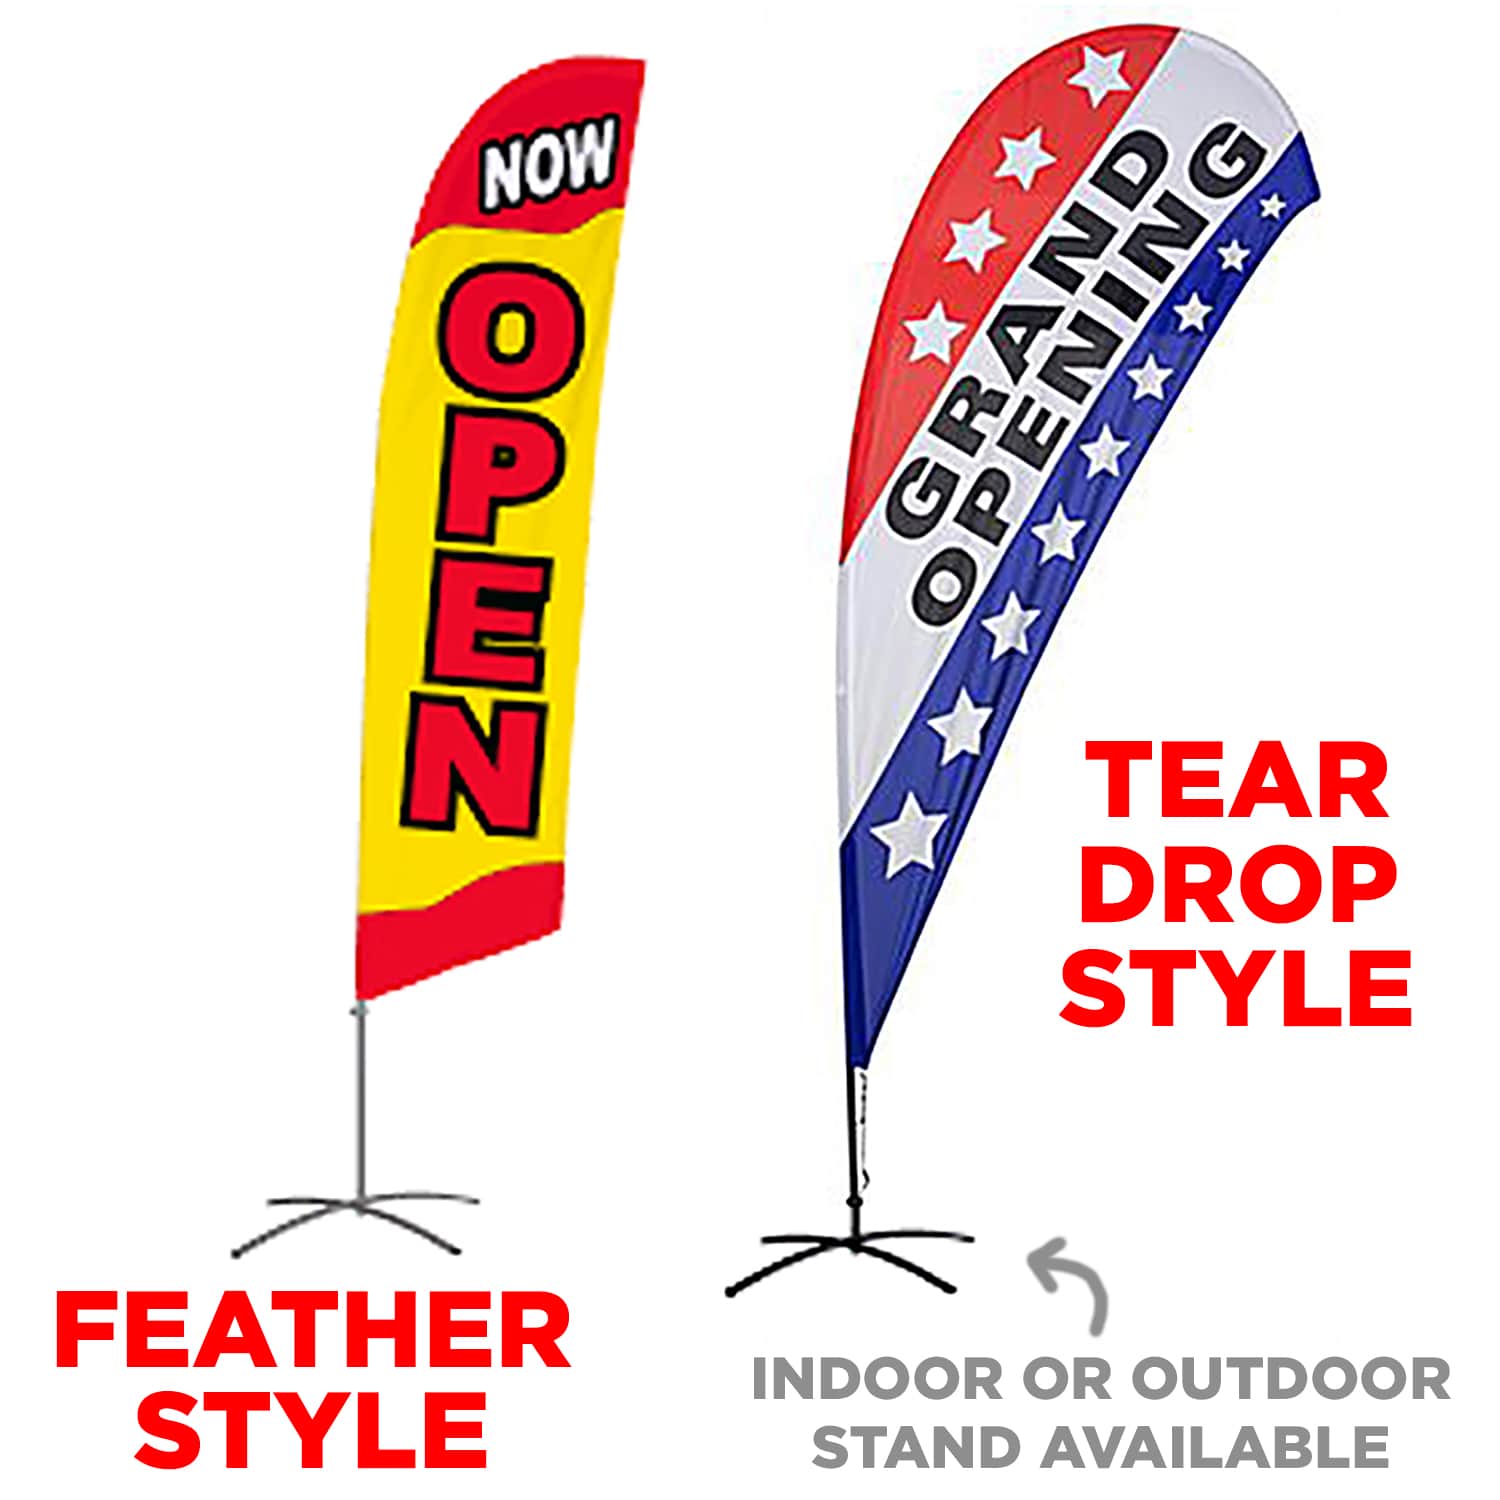 Custom Flags Printed for Business, Feather and Teardrop Styles - Phase 3 Graphics of Grand Rapids MI